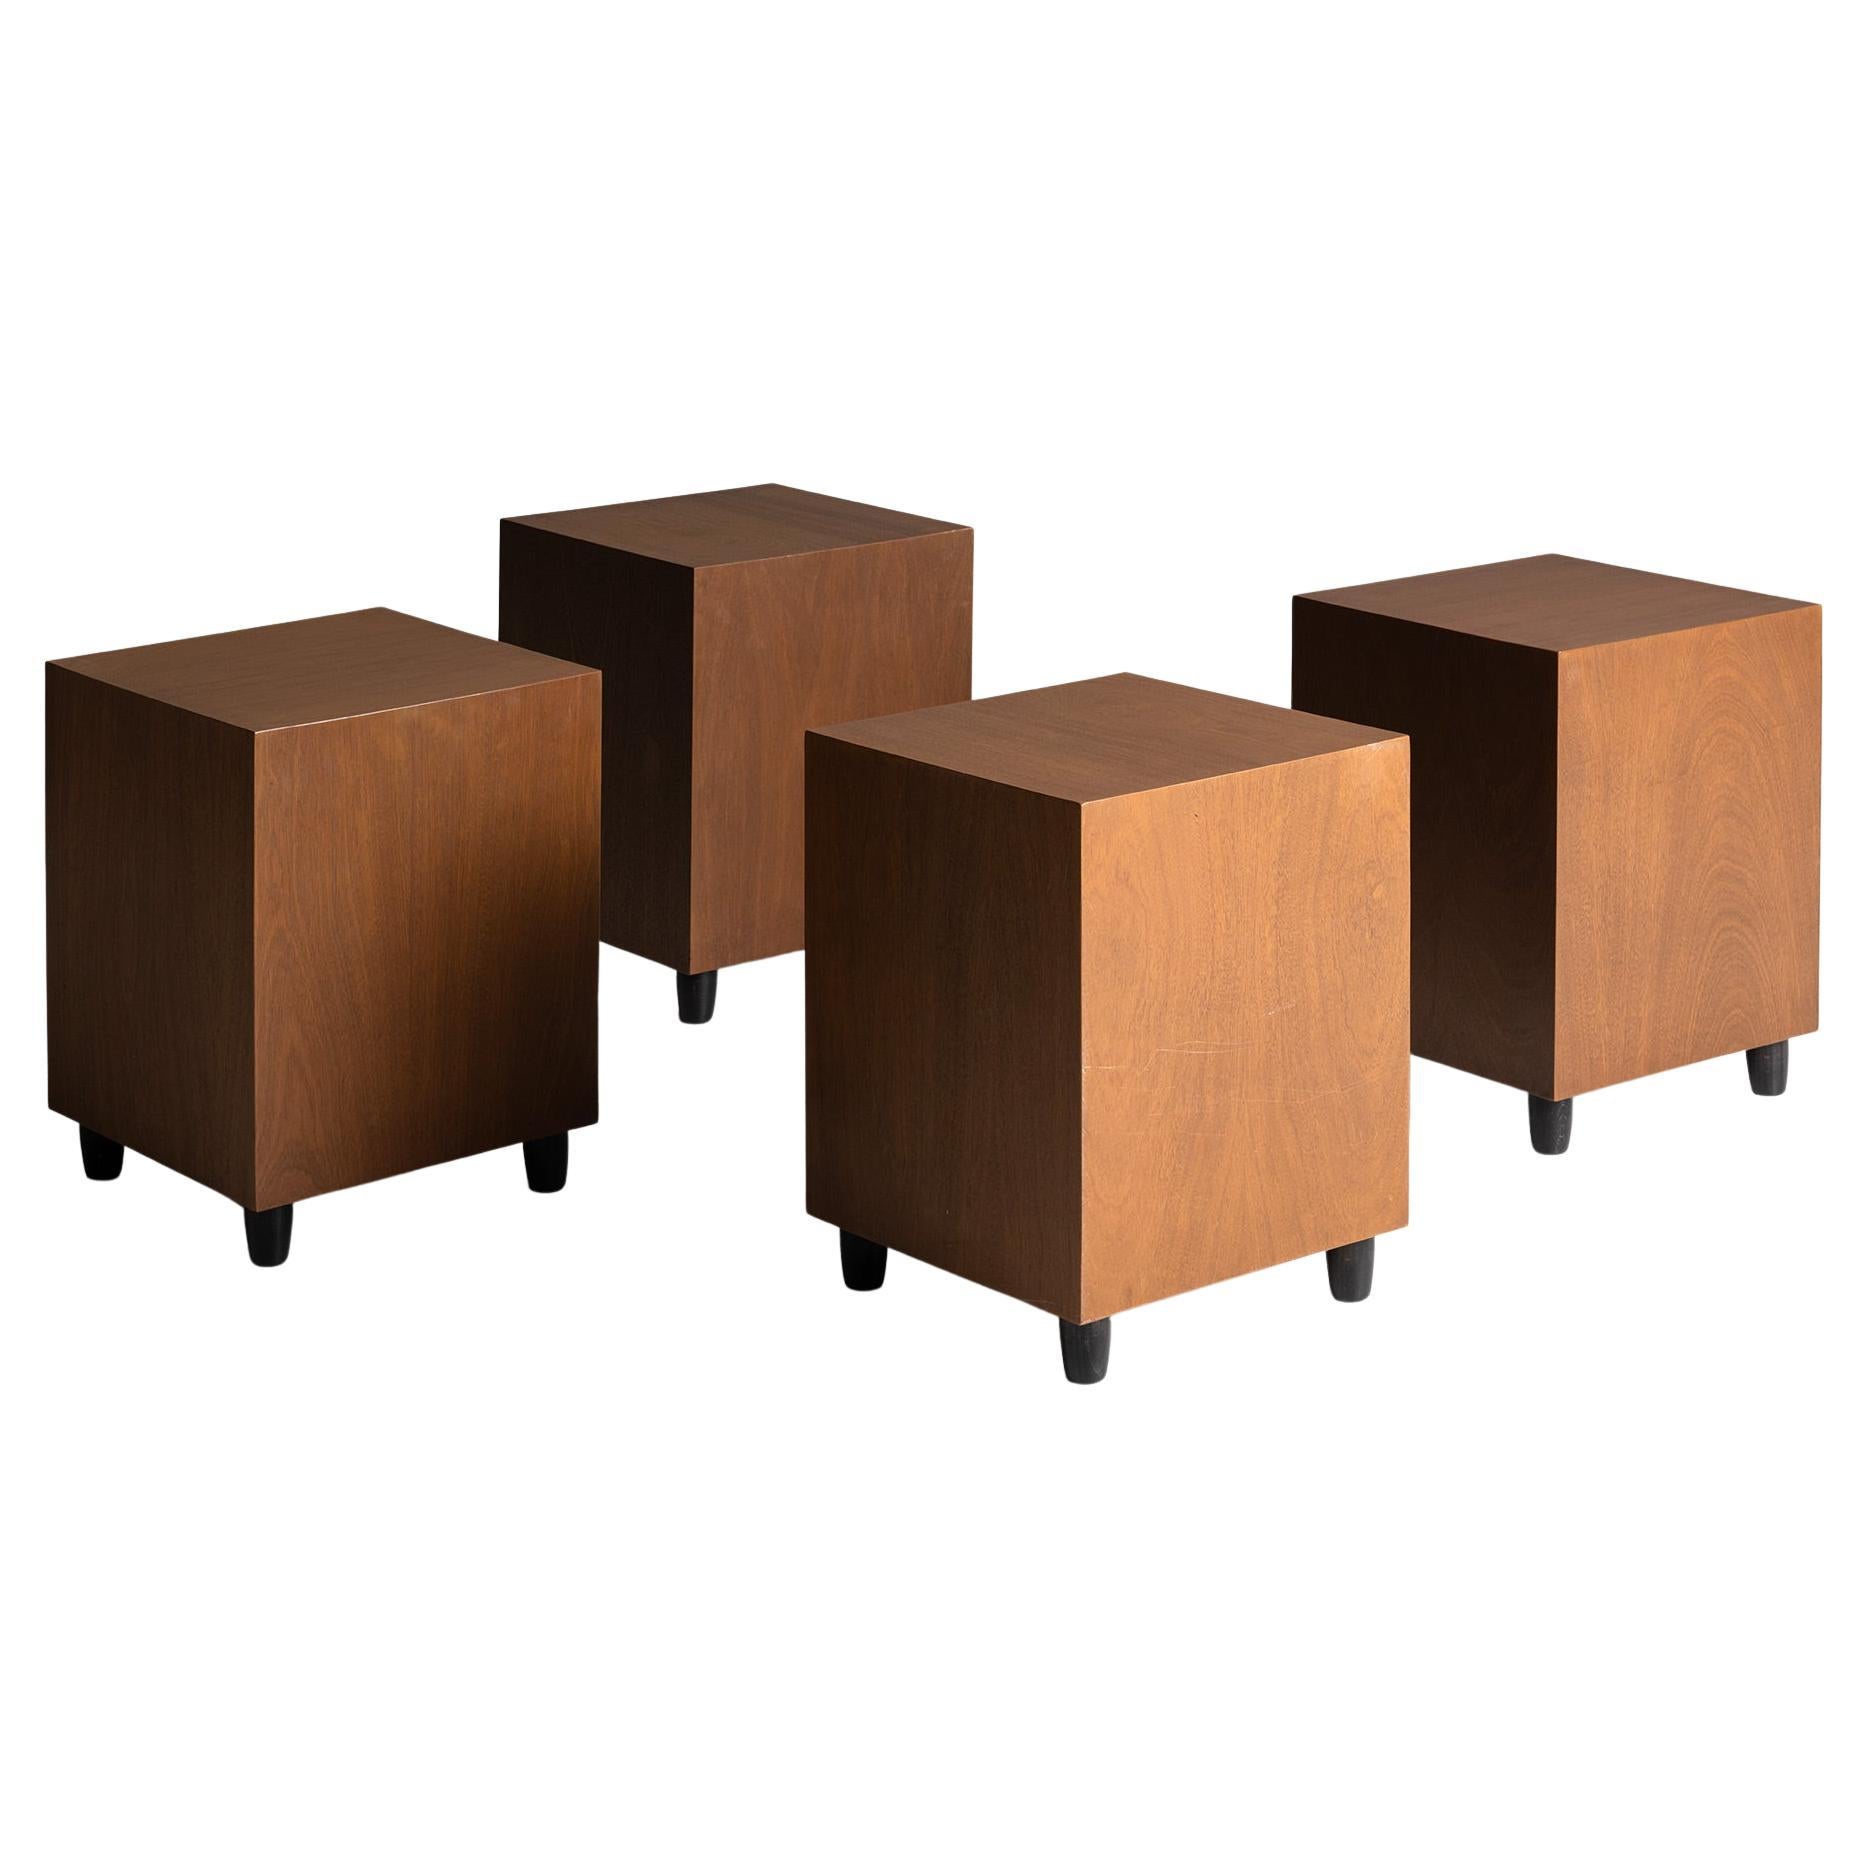 Cube Side Tables, Made in England